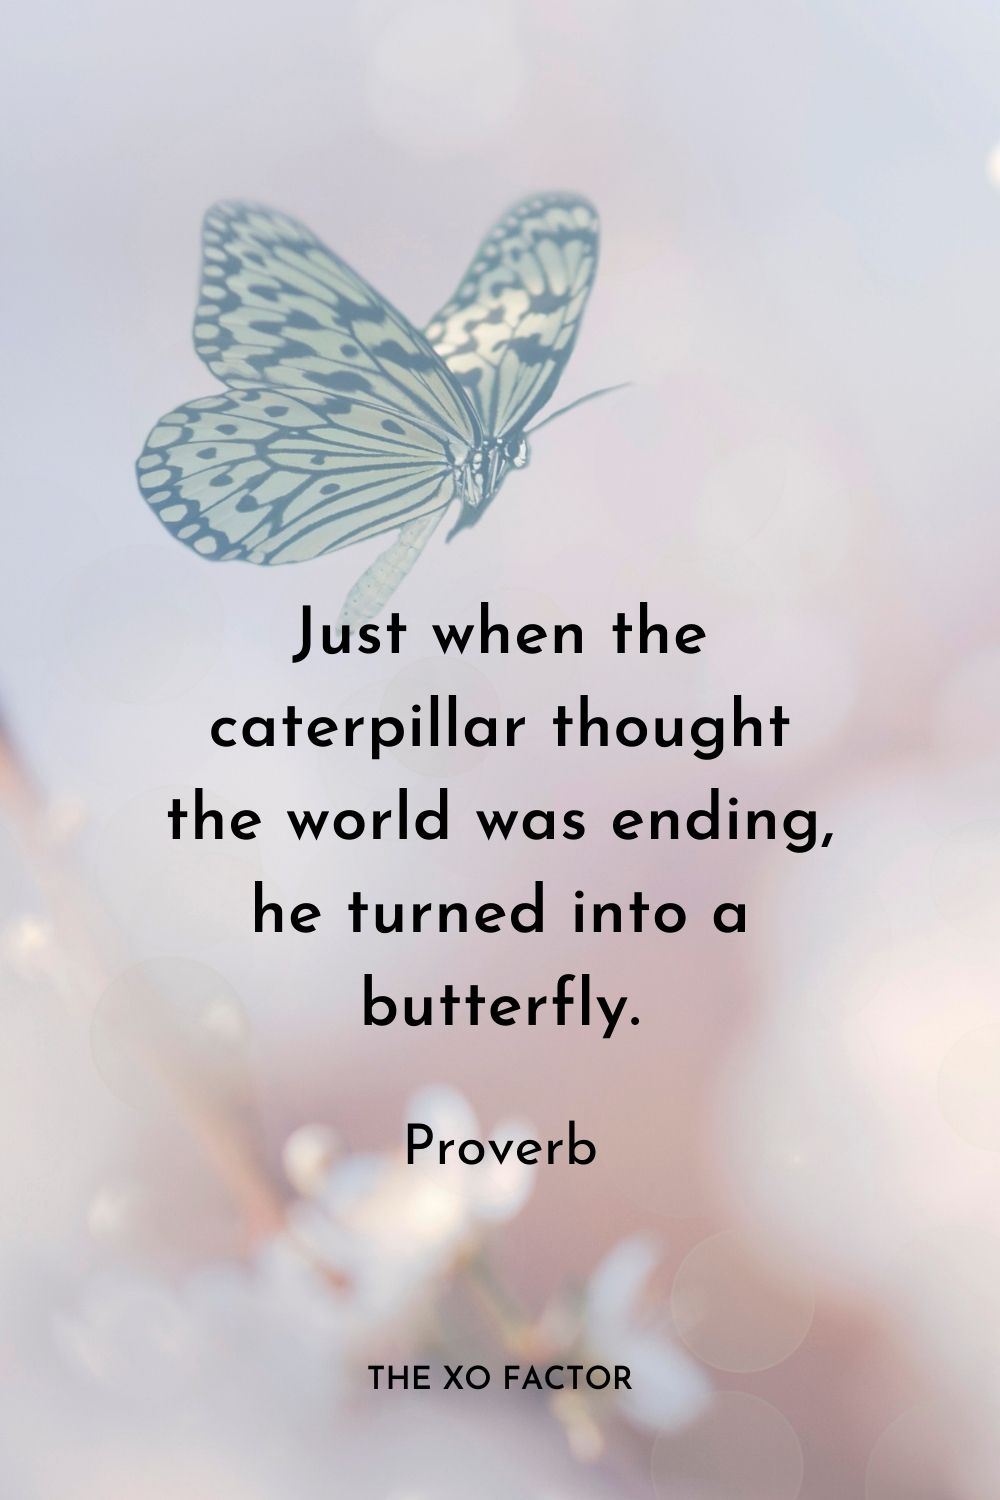 Just when the caterpillar thought the world was ending, he turned into a butterfly.